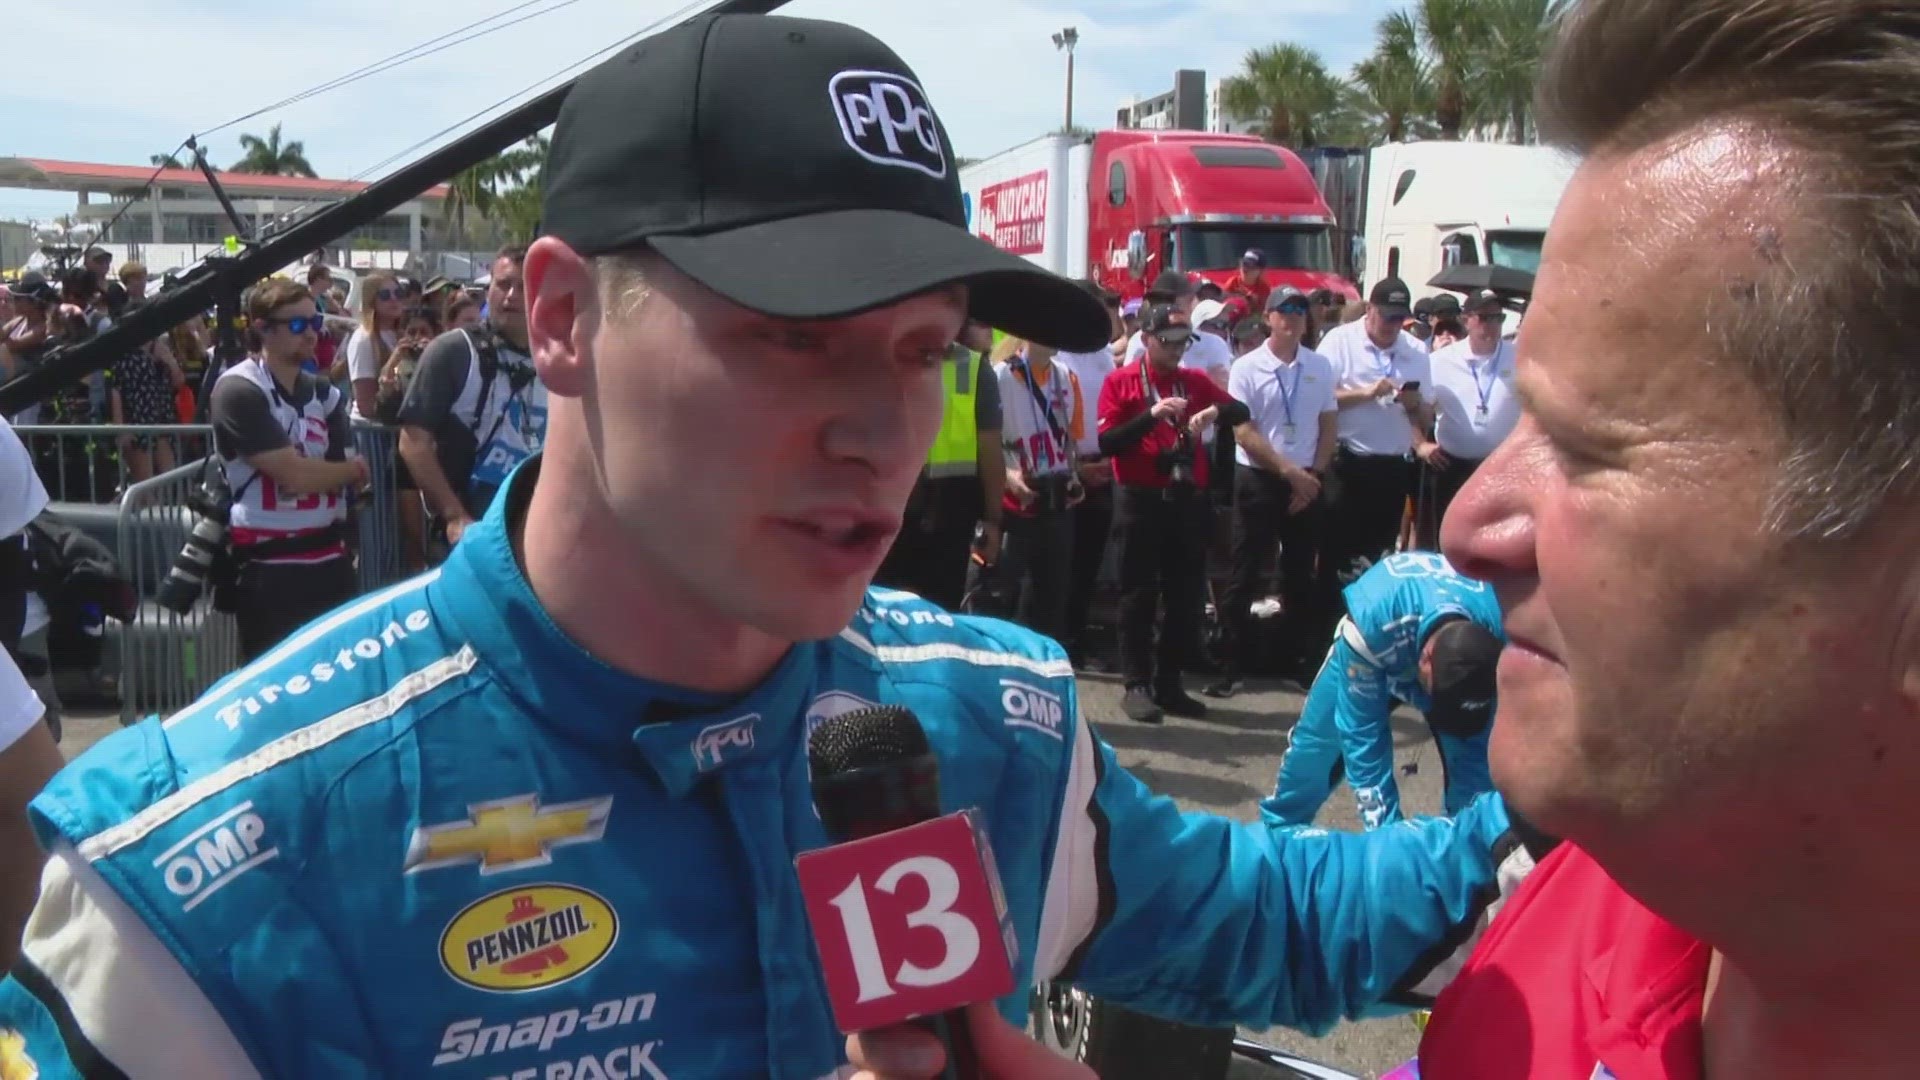 13Sports director Dave Calabro talked with Josef Newgarden after winning the season opening IndyCar race at St. Petersburg.